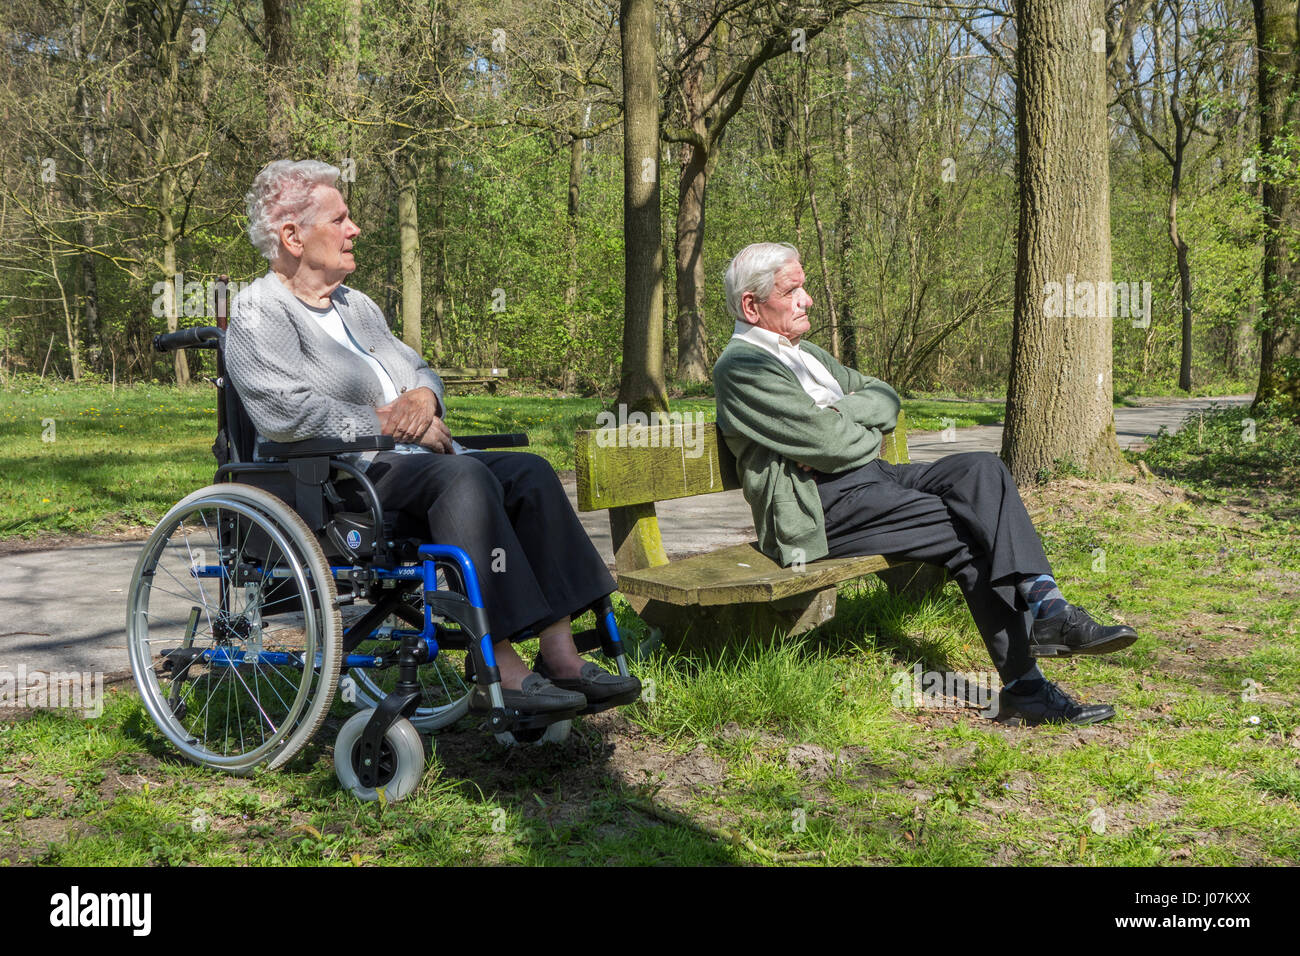 Disabled elderly woman in wheelchair and retired husband sitting on a park bench enjoying nature during stroll in forest on a sunny day in spring Stock Photo